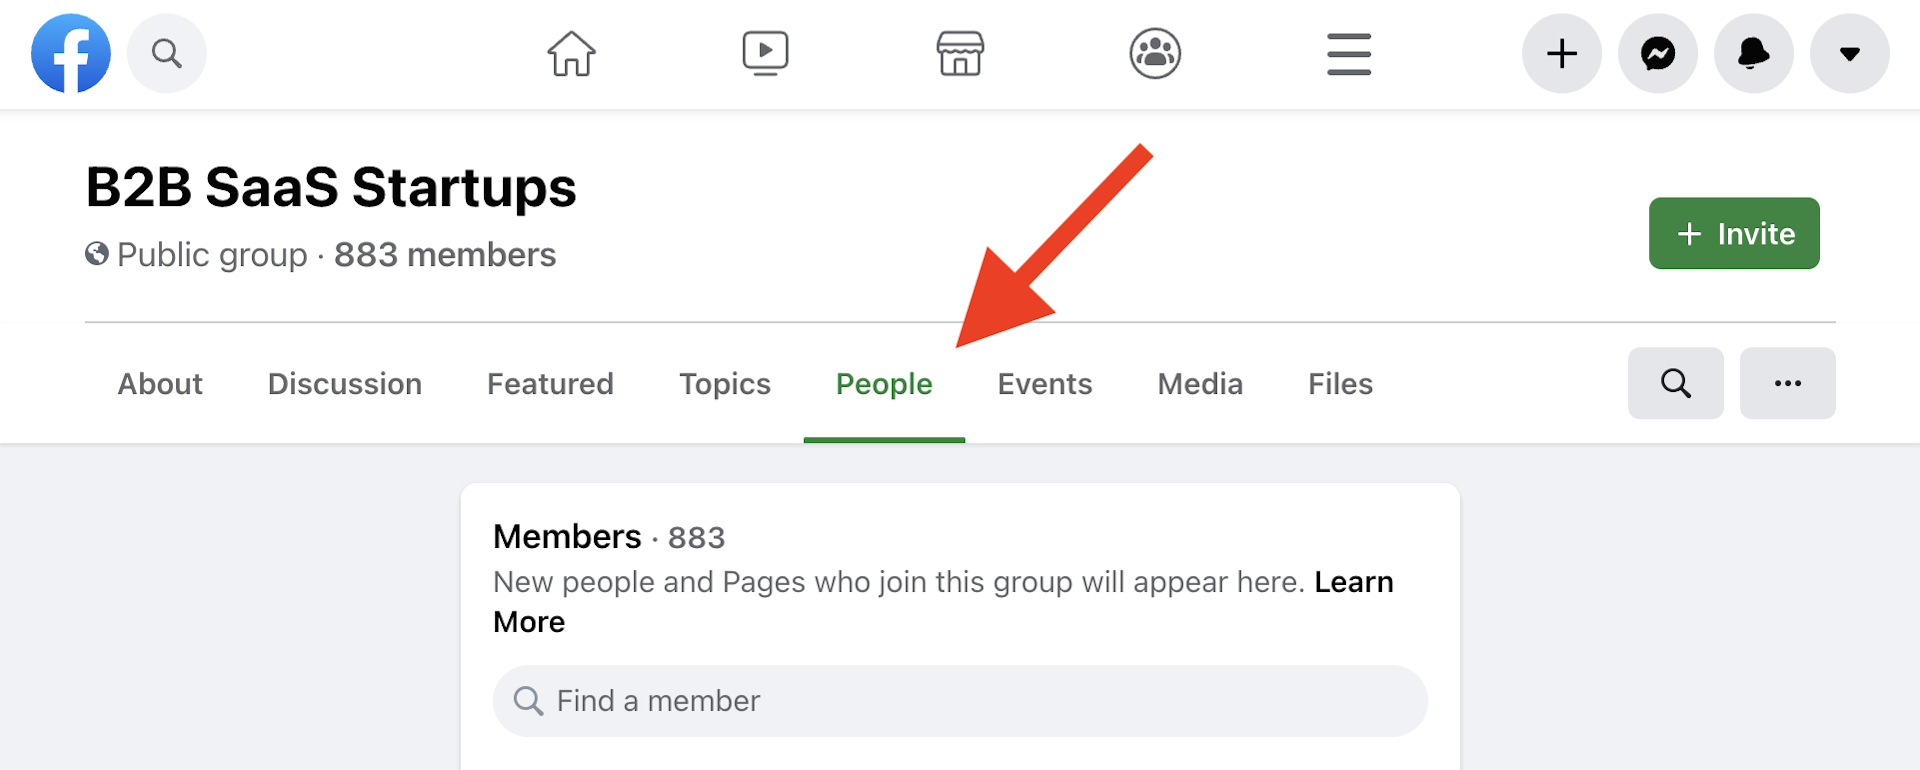 New members are listed on the "People" page.